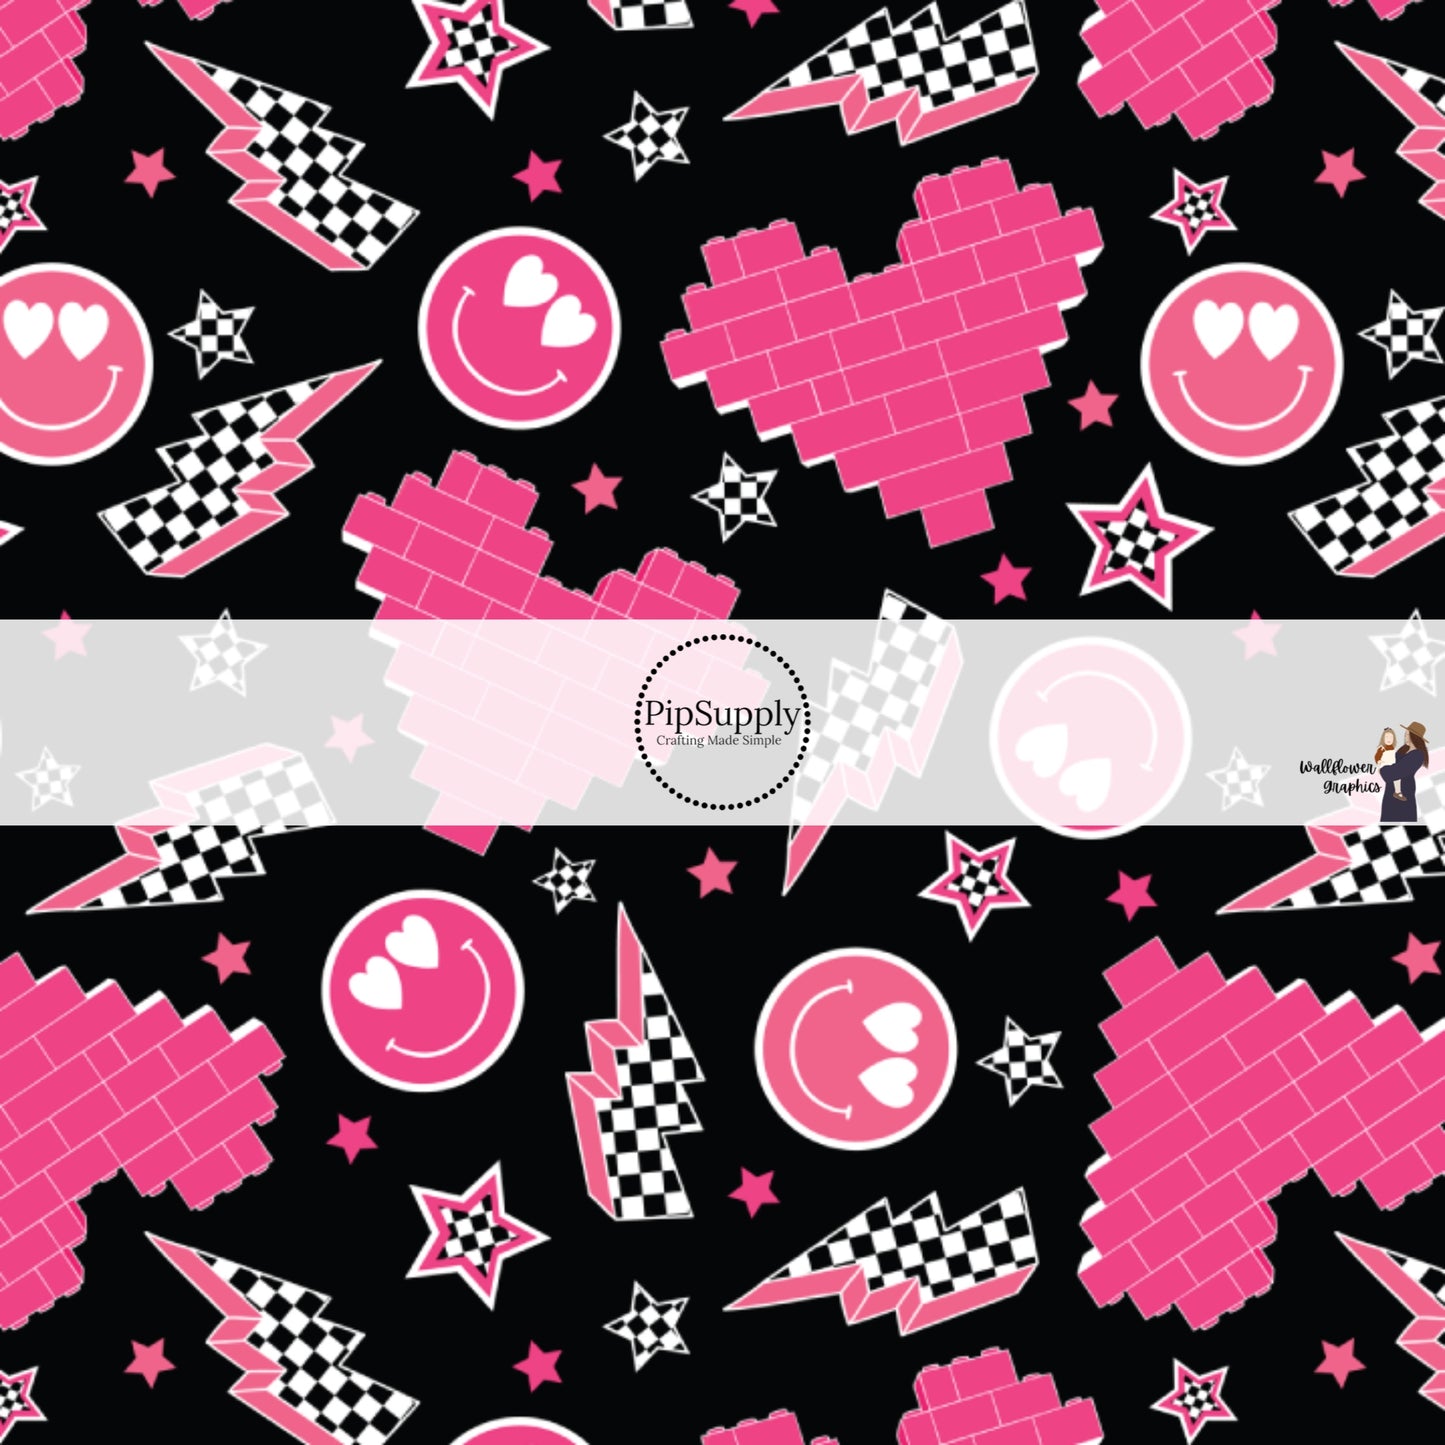 Pink Hearts, Smiley Faces, and Lightning Bolts on Black Valentine's Day Fabric by the Yard.